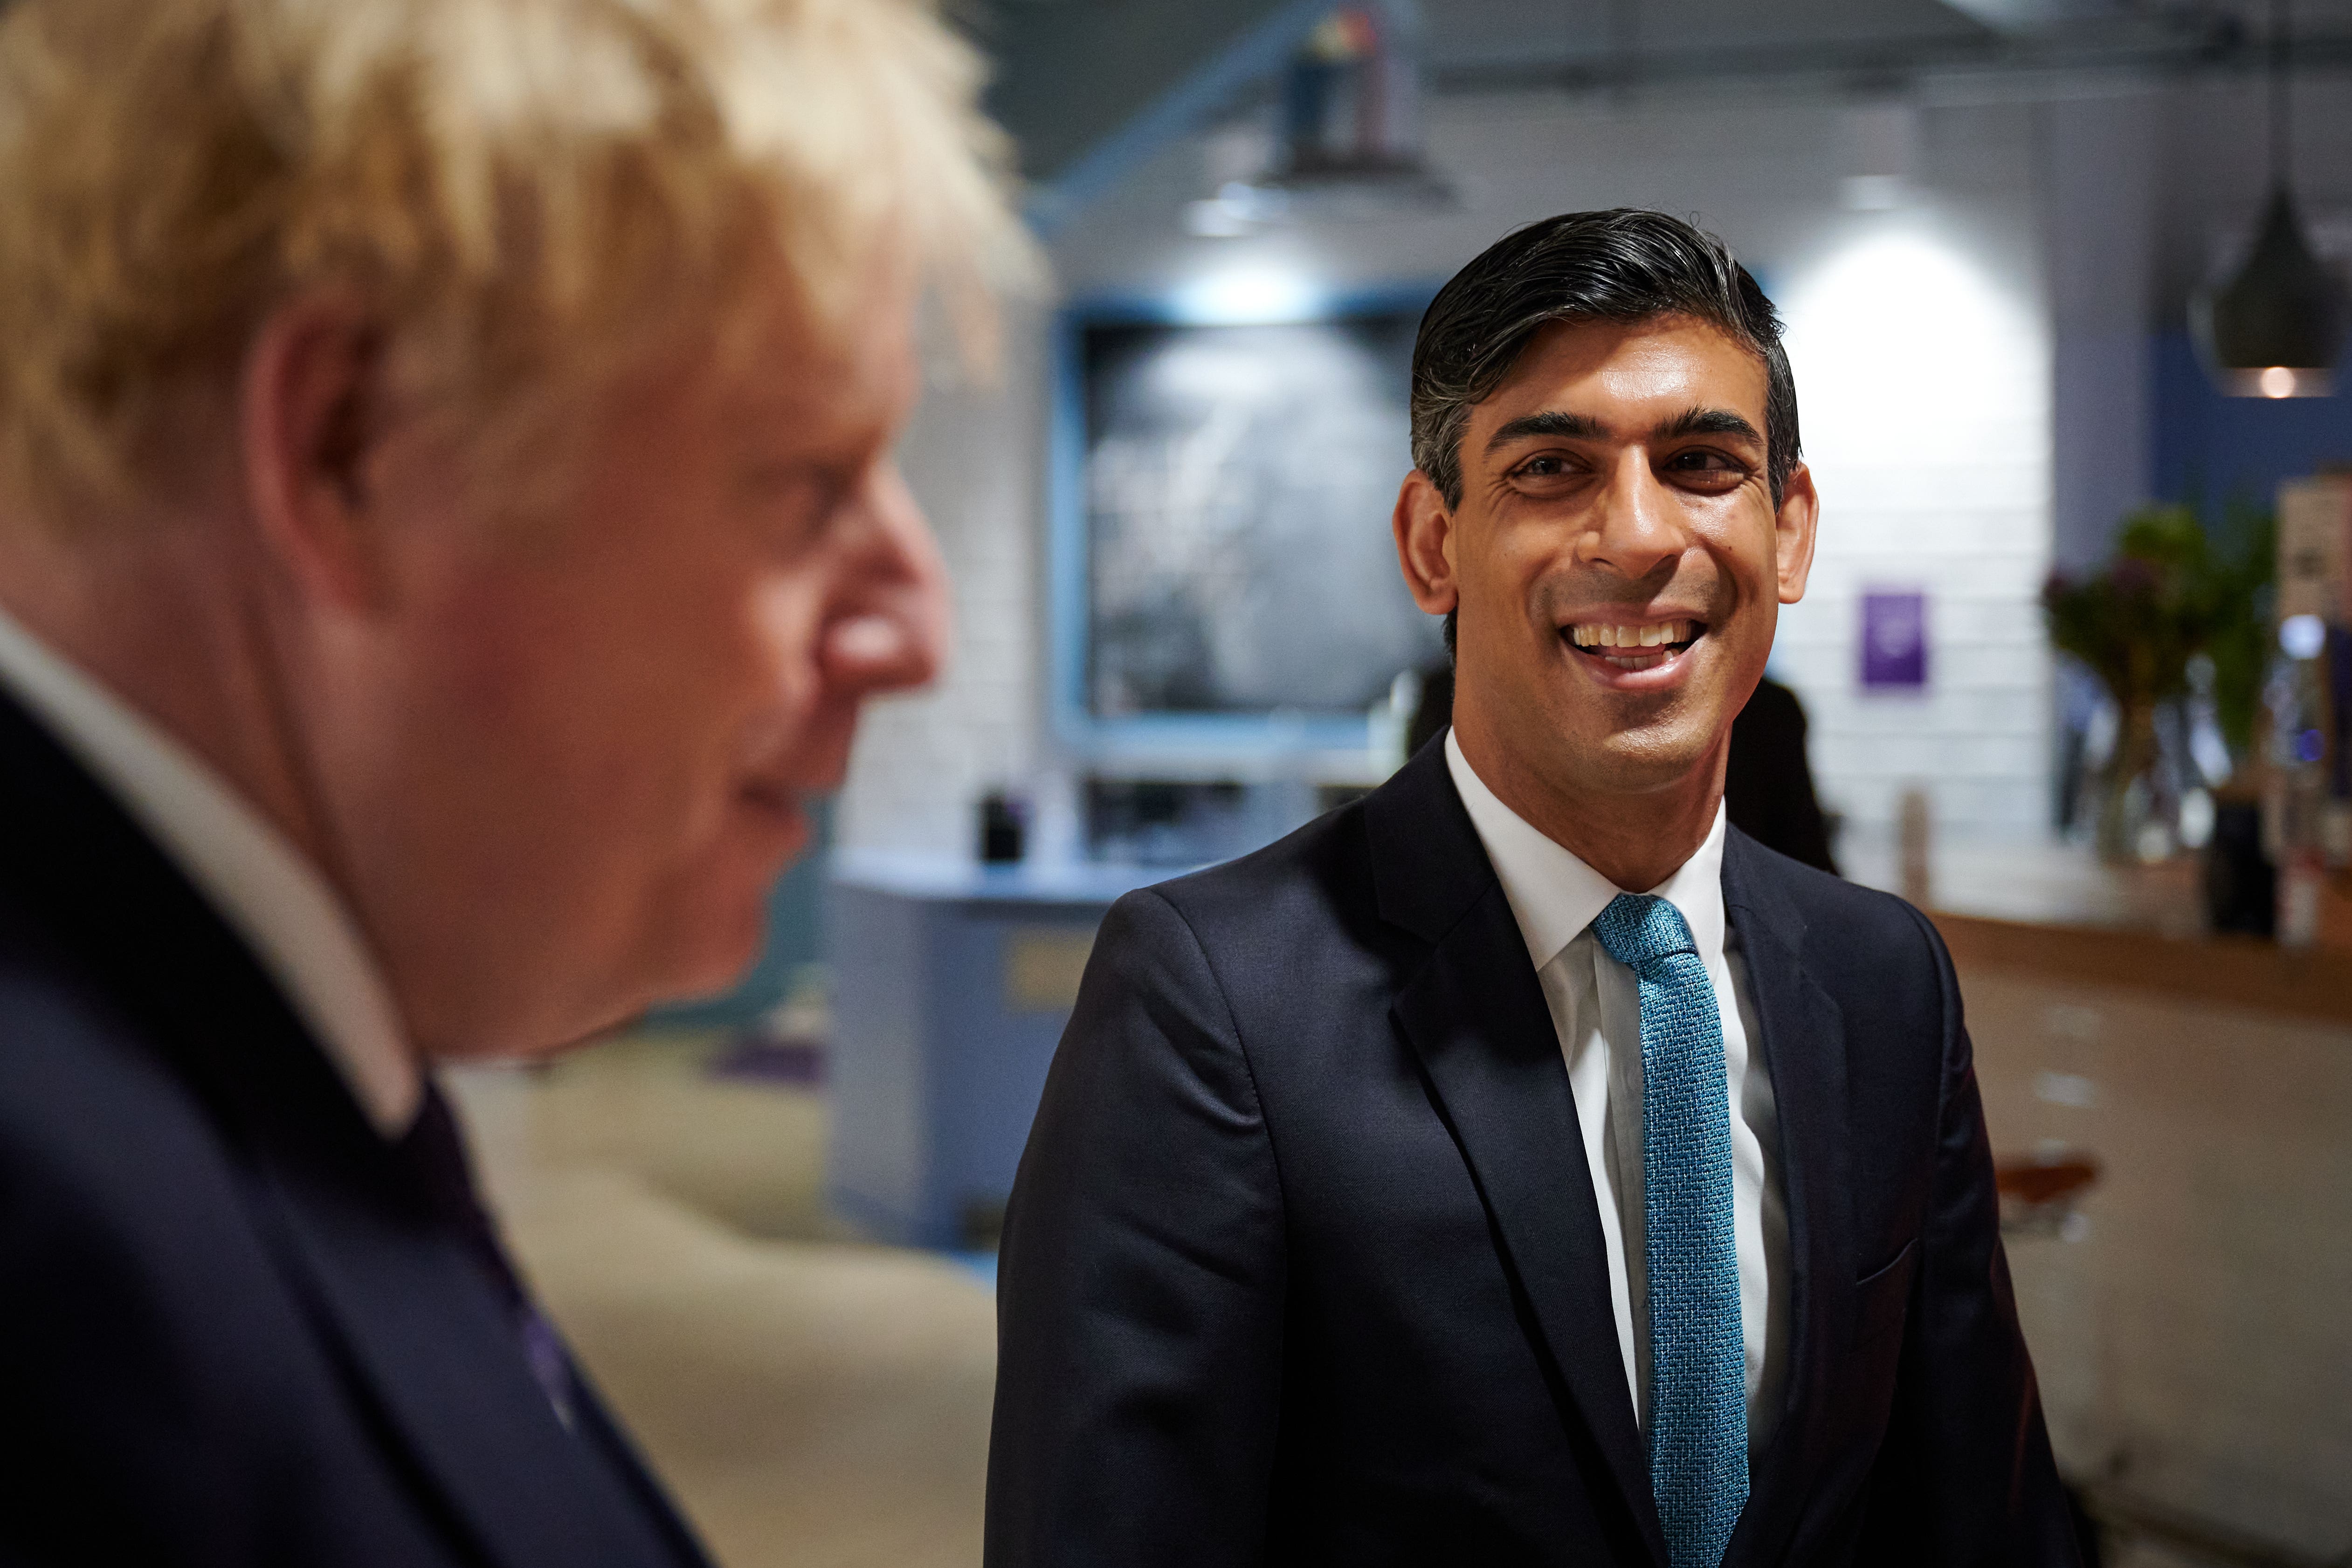 Expected meeting between Boris Johnson and Rishi Sunak this week was scrapped